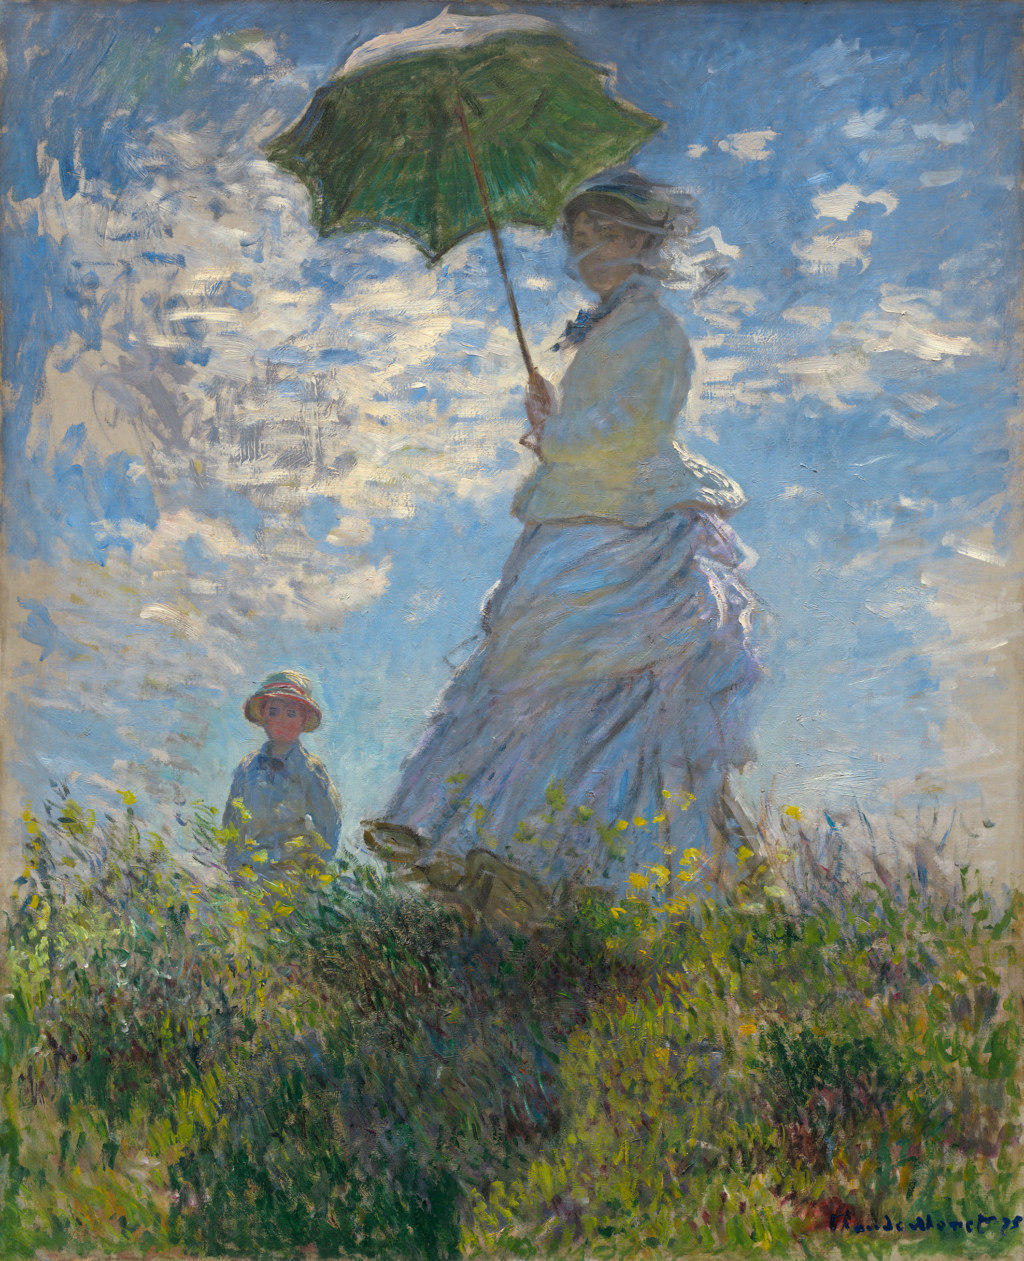 Early Modernists - painting by Monet